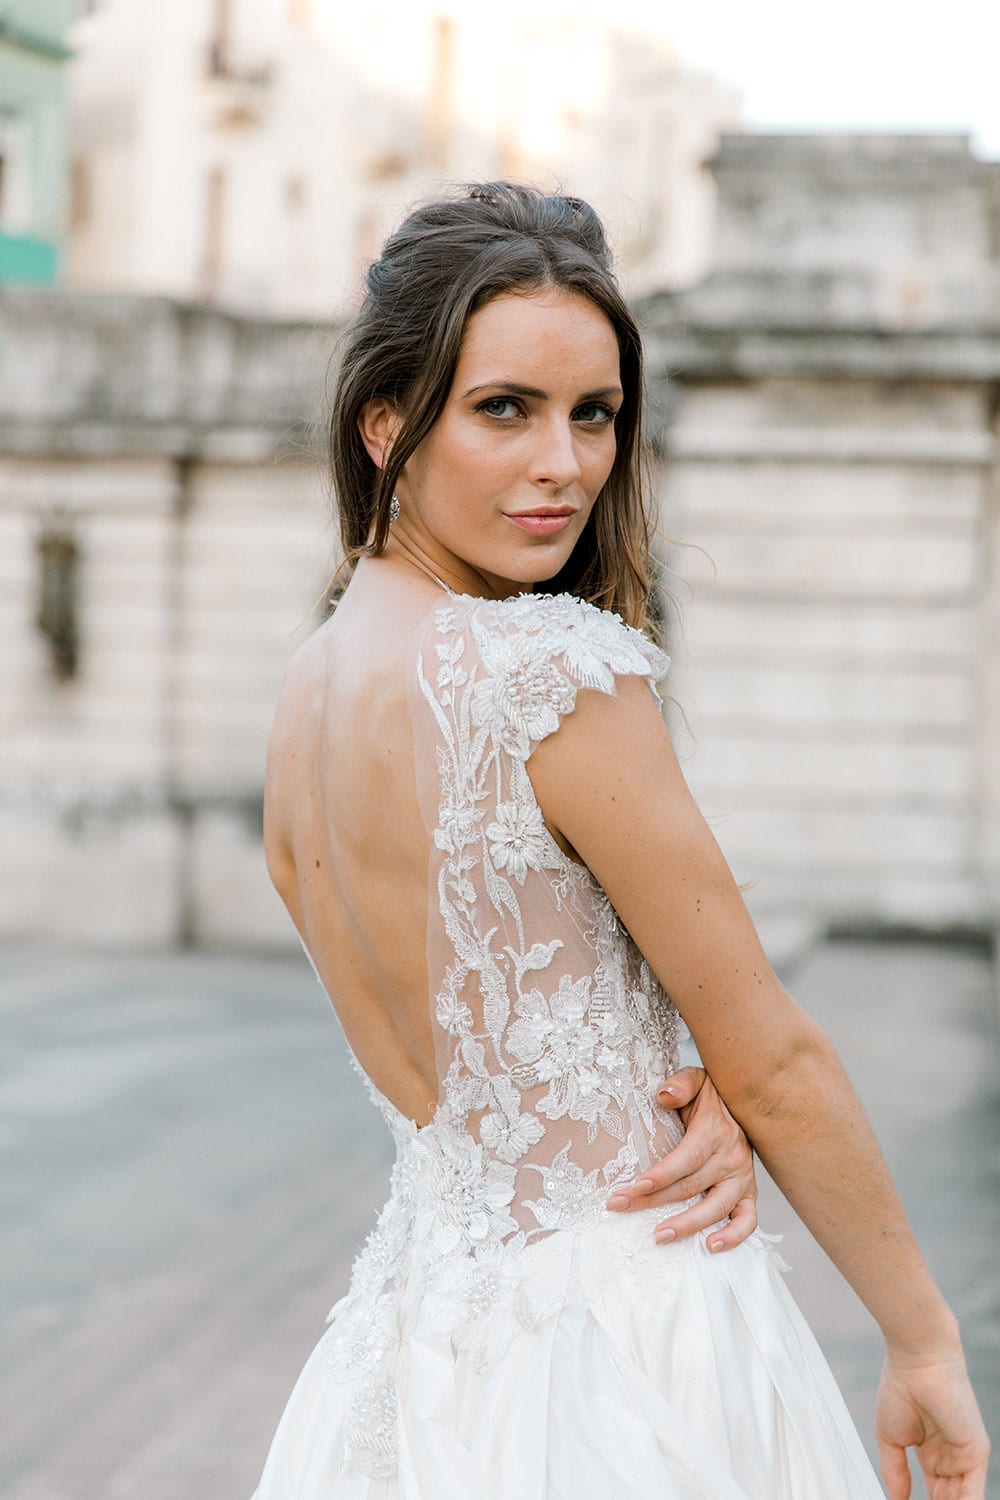 Model wearing Vinka Design Annalie Wedding Dress, a Beaded Lace High Neck Silk Wedding Gown close up facing away showing low back detail in the backdrop of Havana